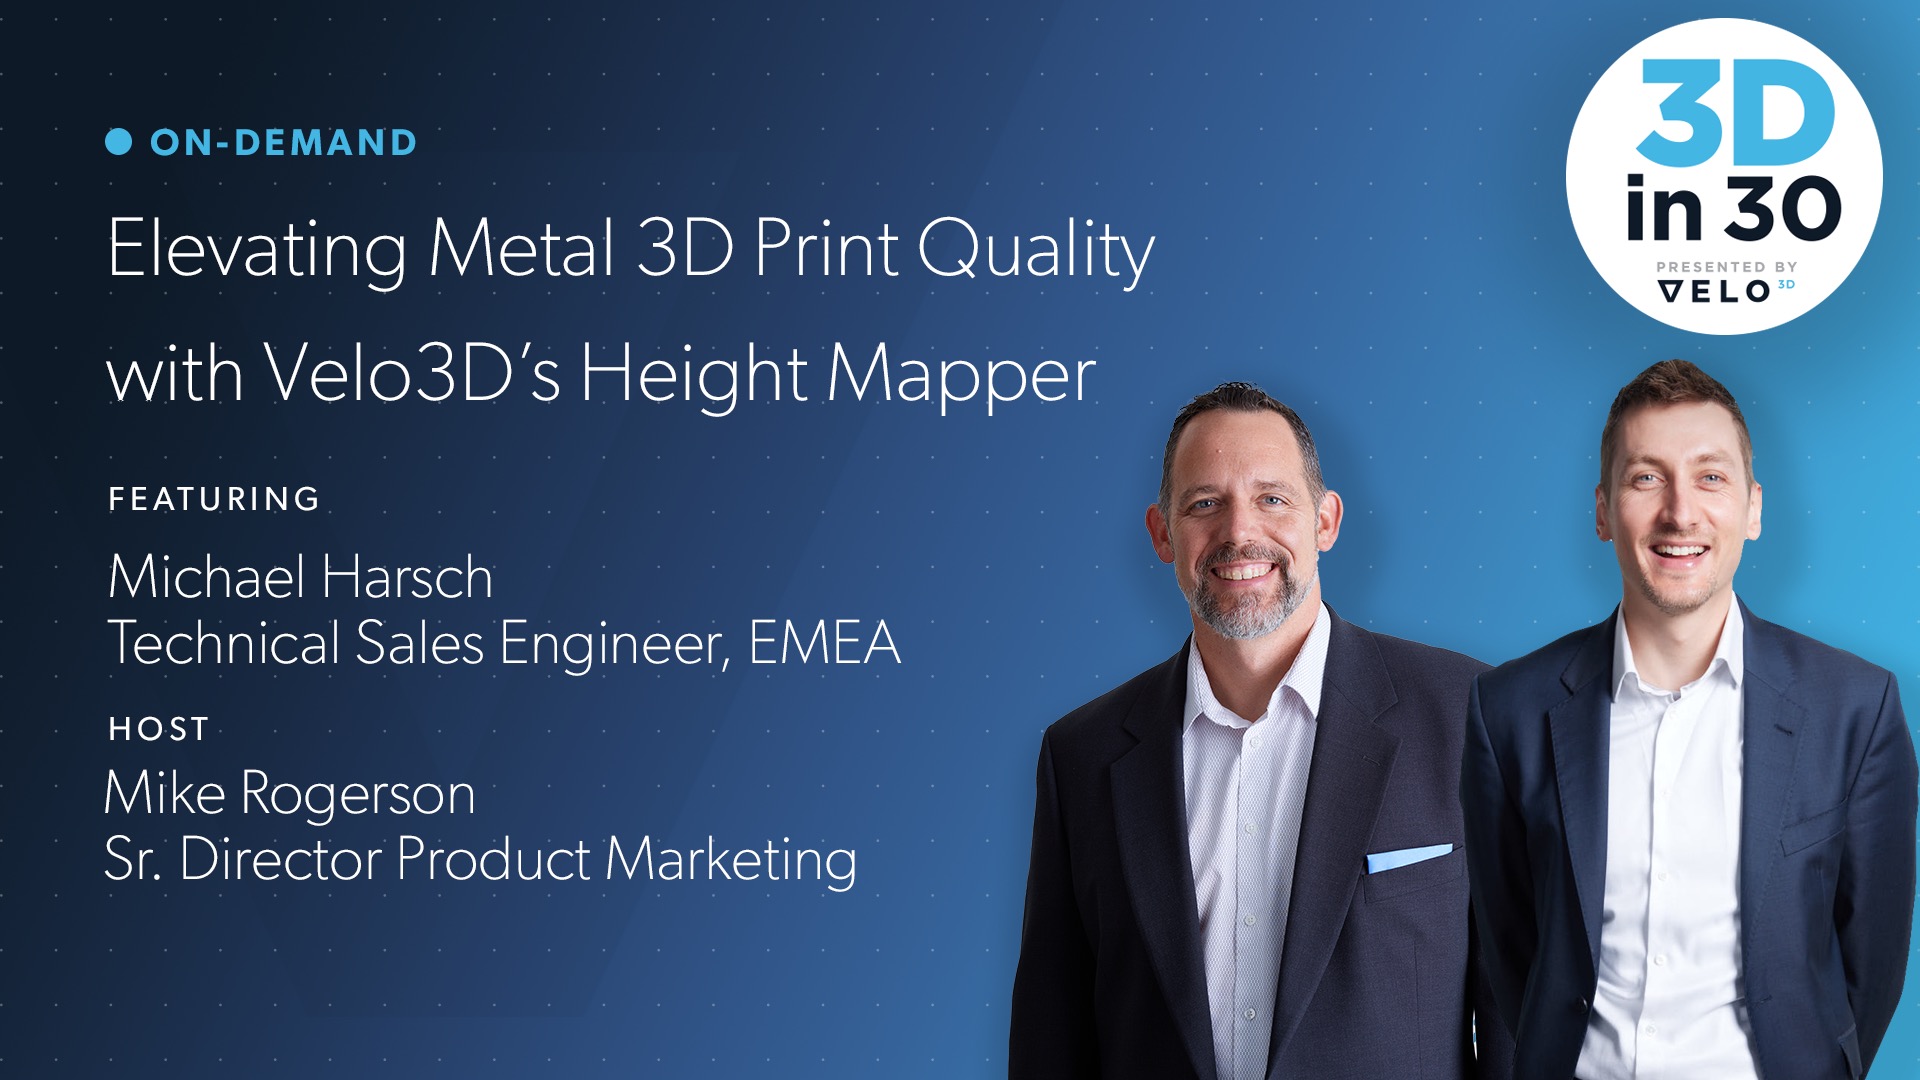 Elevating Metal 3D Print Quality with Velo3D’s Height Mapper